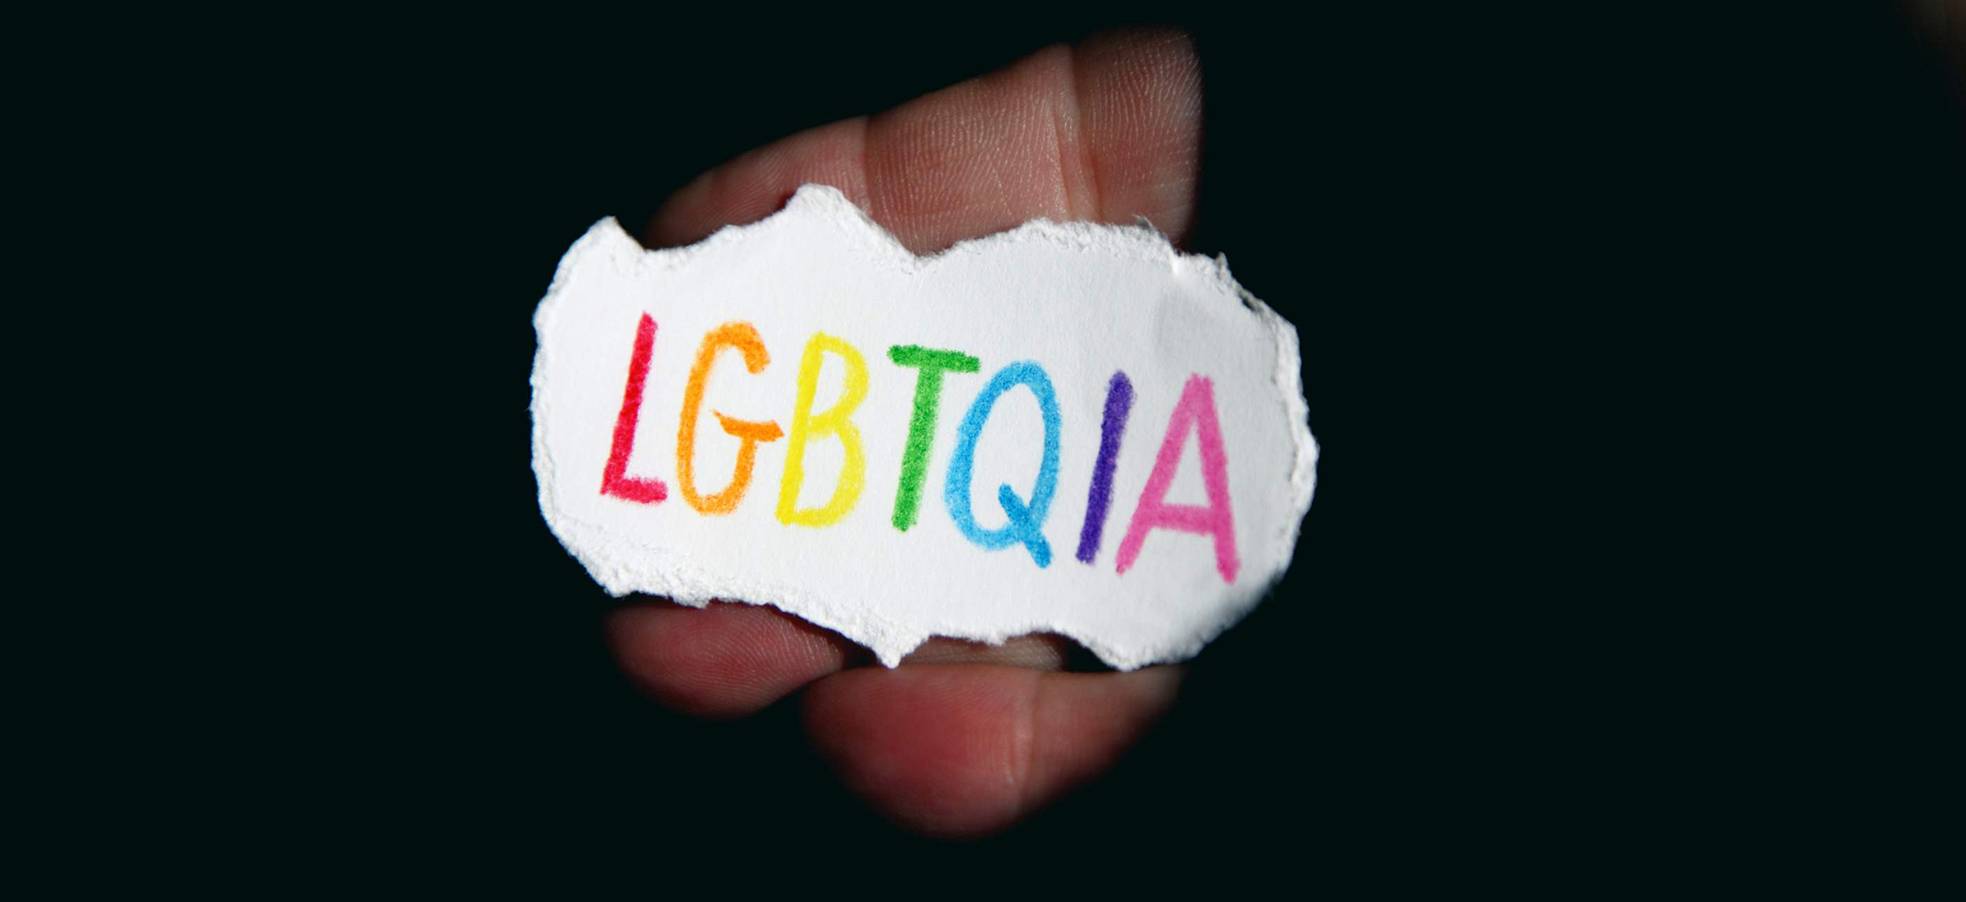 lgbtq written on a piece of paper